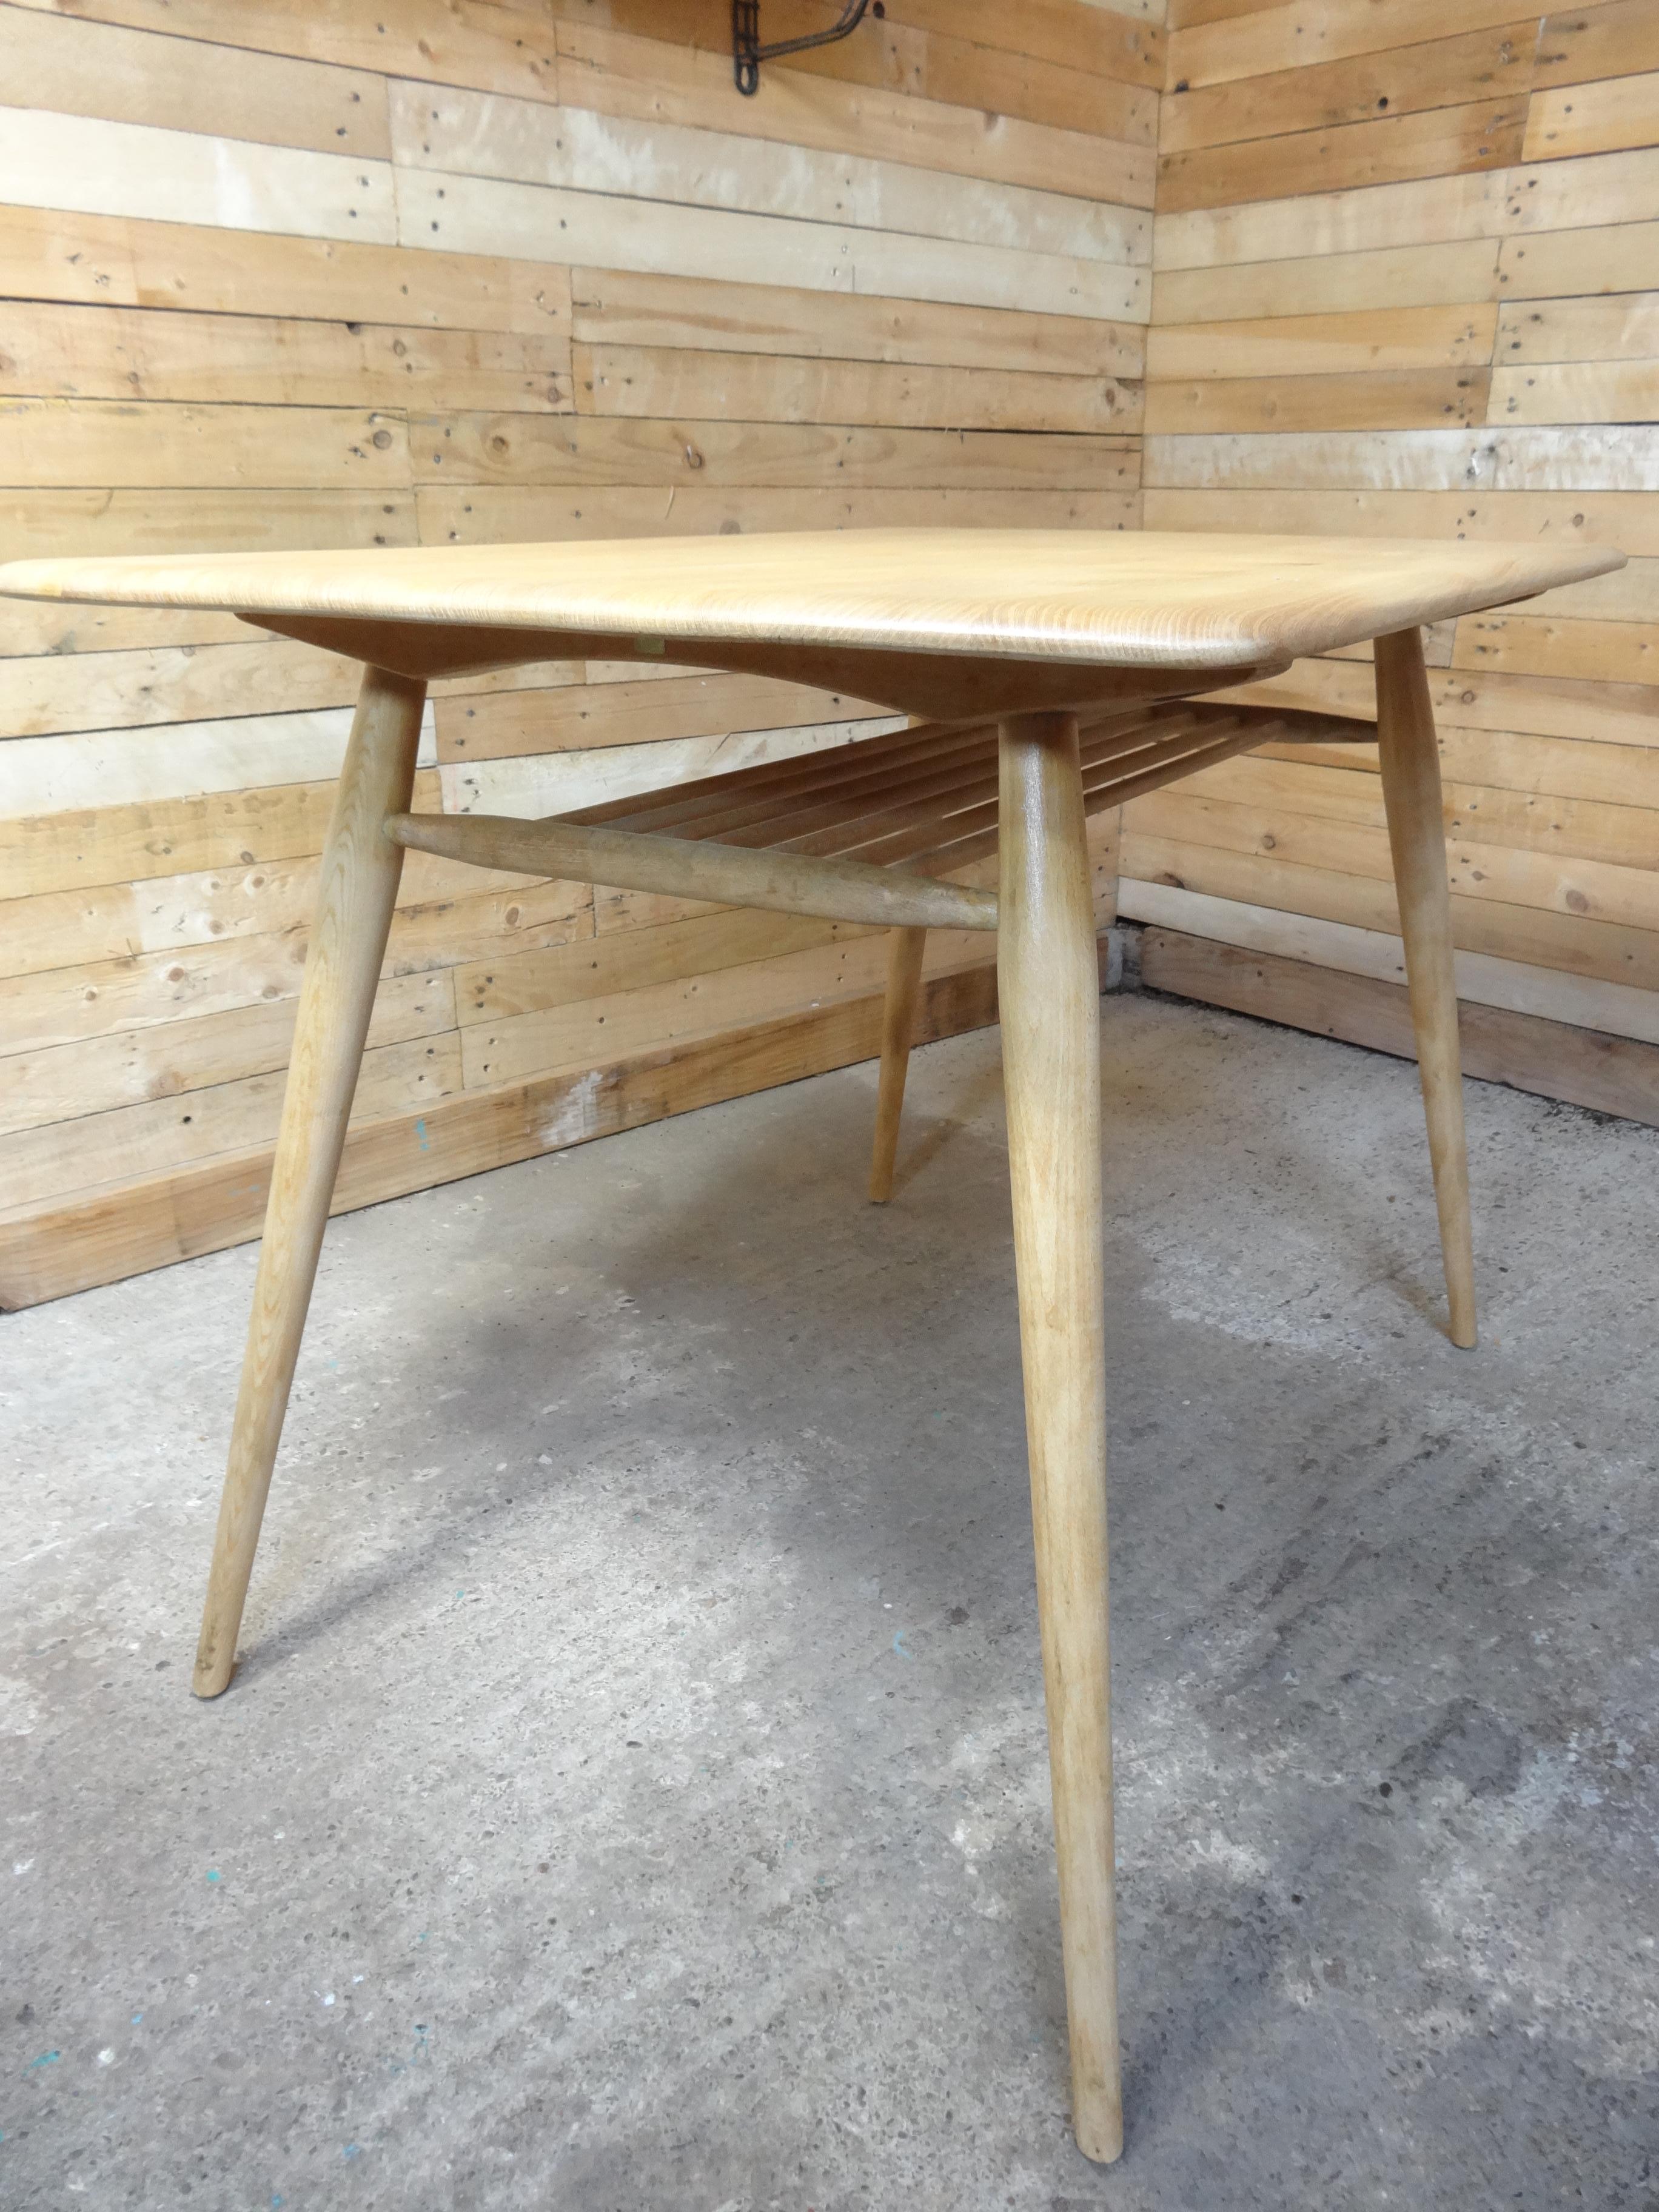 Table designed by Lucian Ercolani for the renowned Ercol furniture makers. We currently have 6 of these tables available, quite a rare table with a very useful magazine rack underneath the table op, great for your coffee shop or